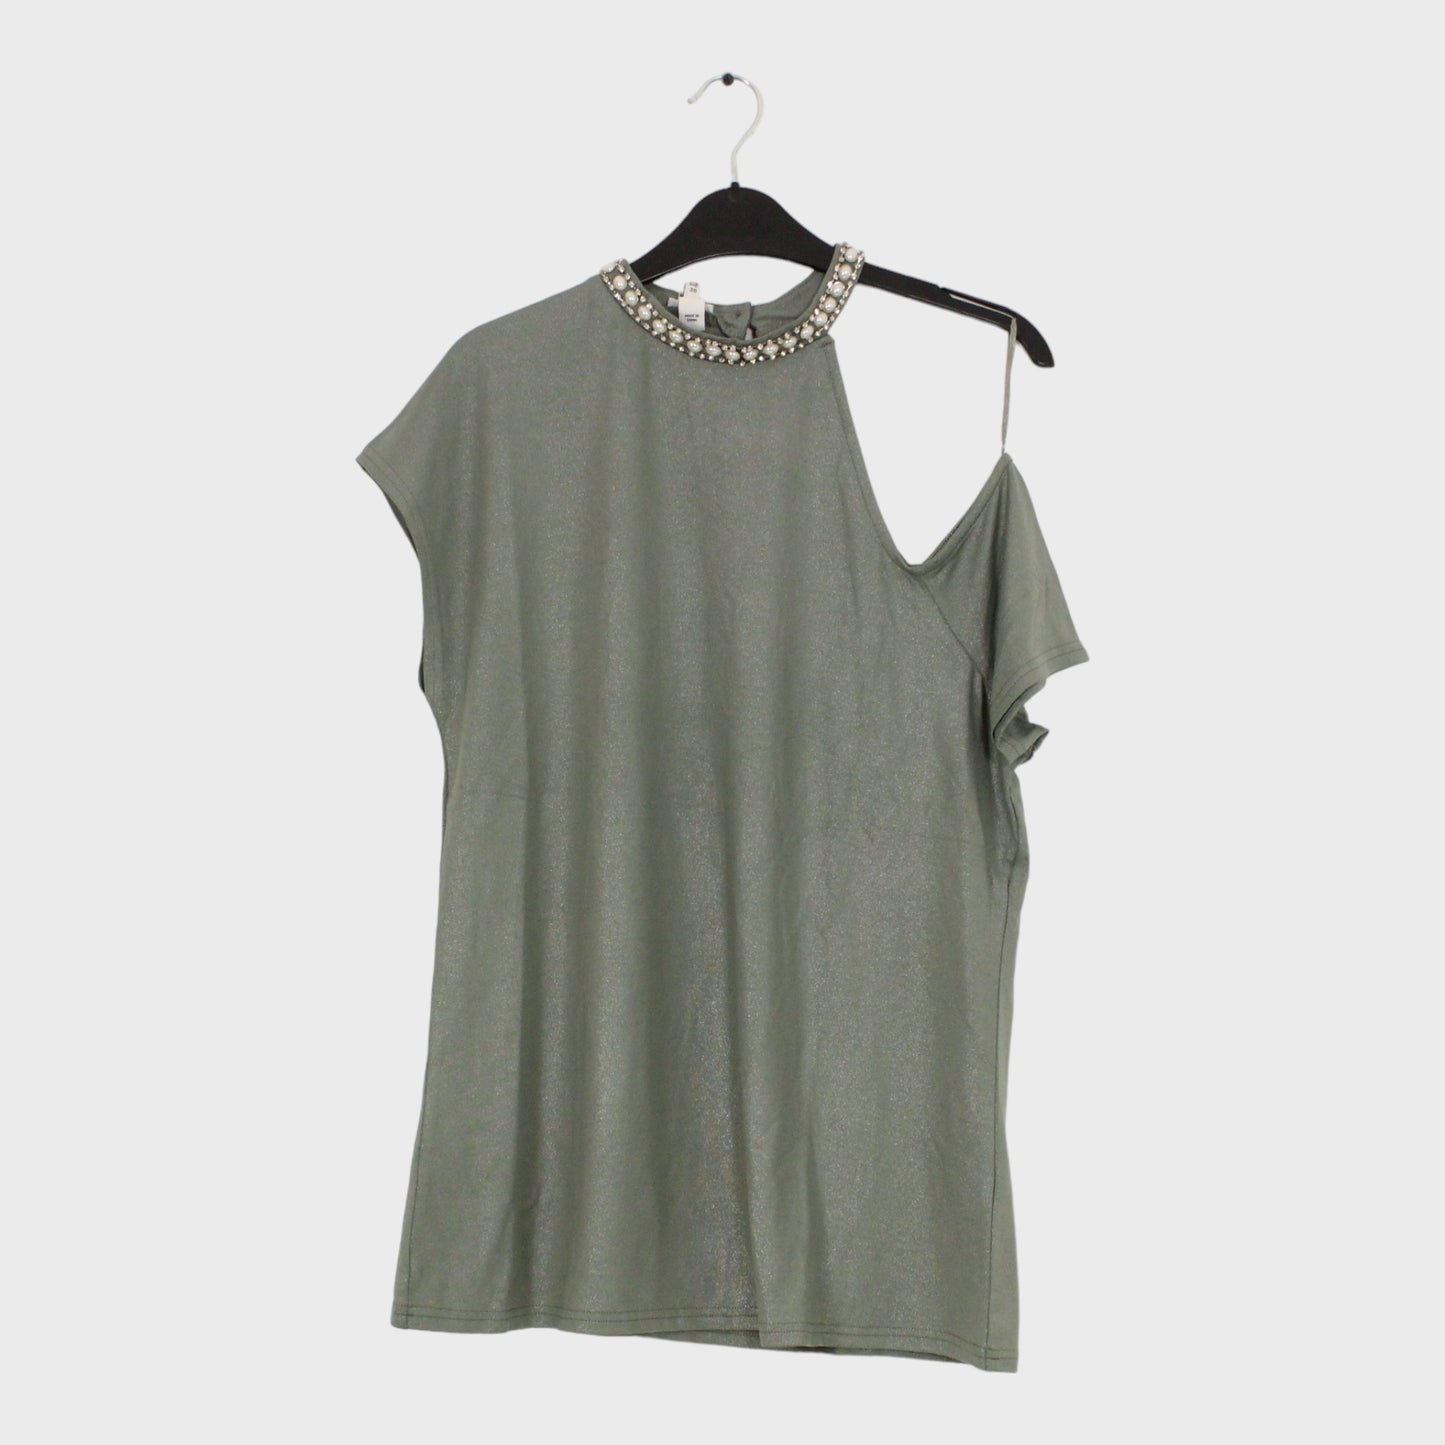 Women's One Shoulder Top with Beading Army Green